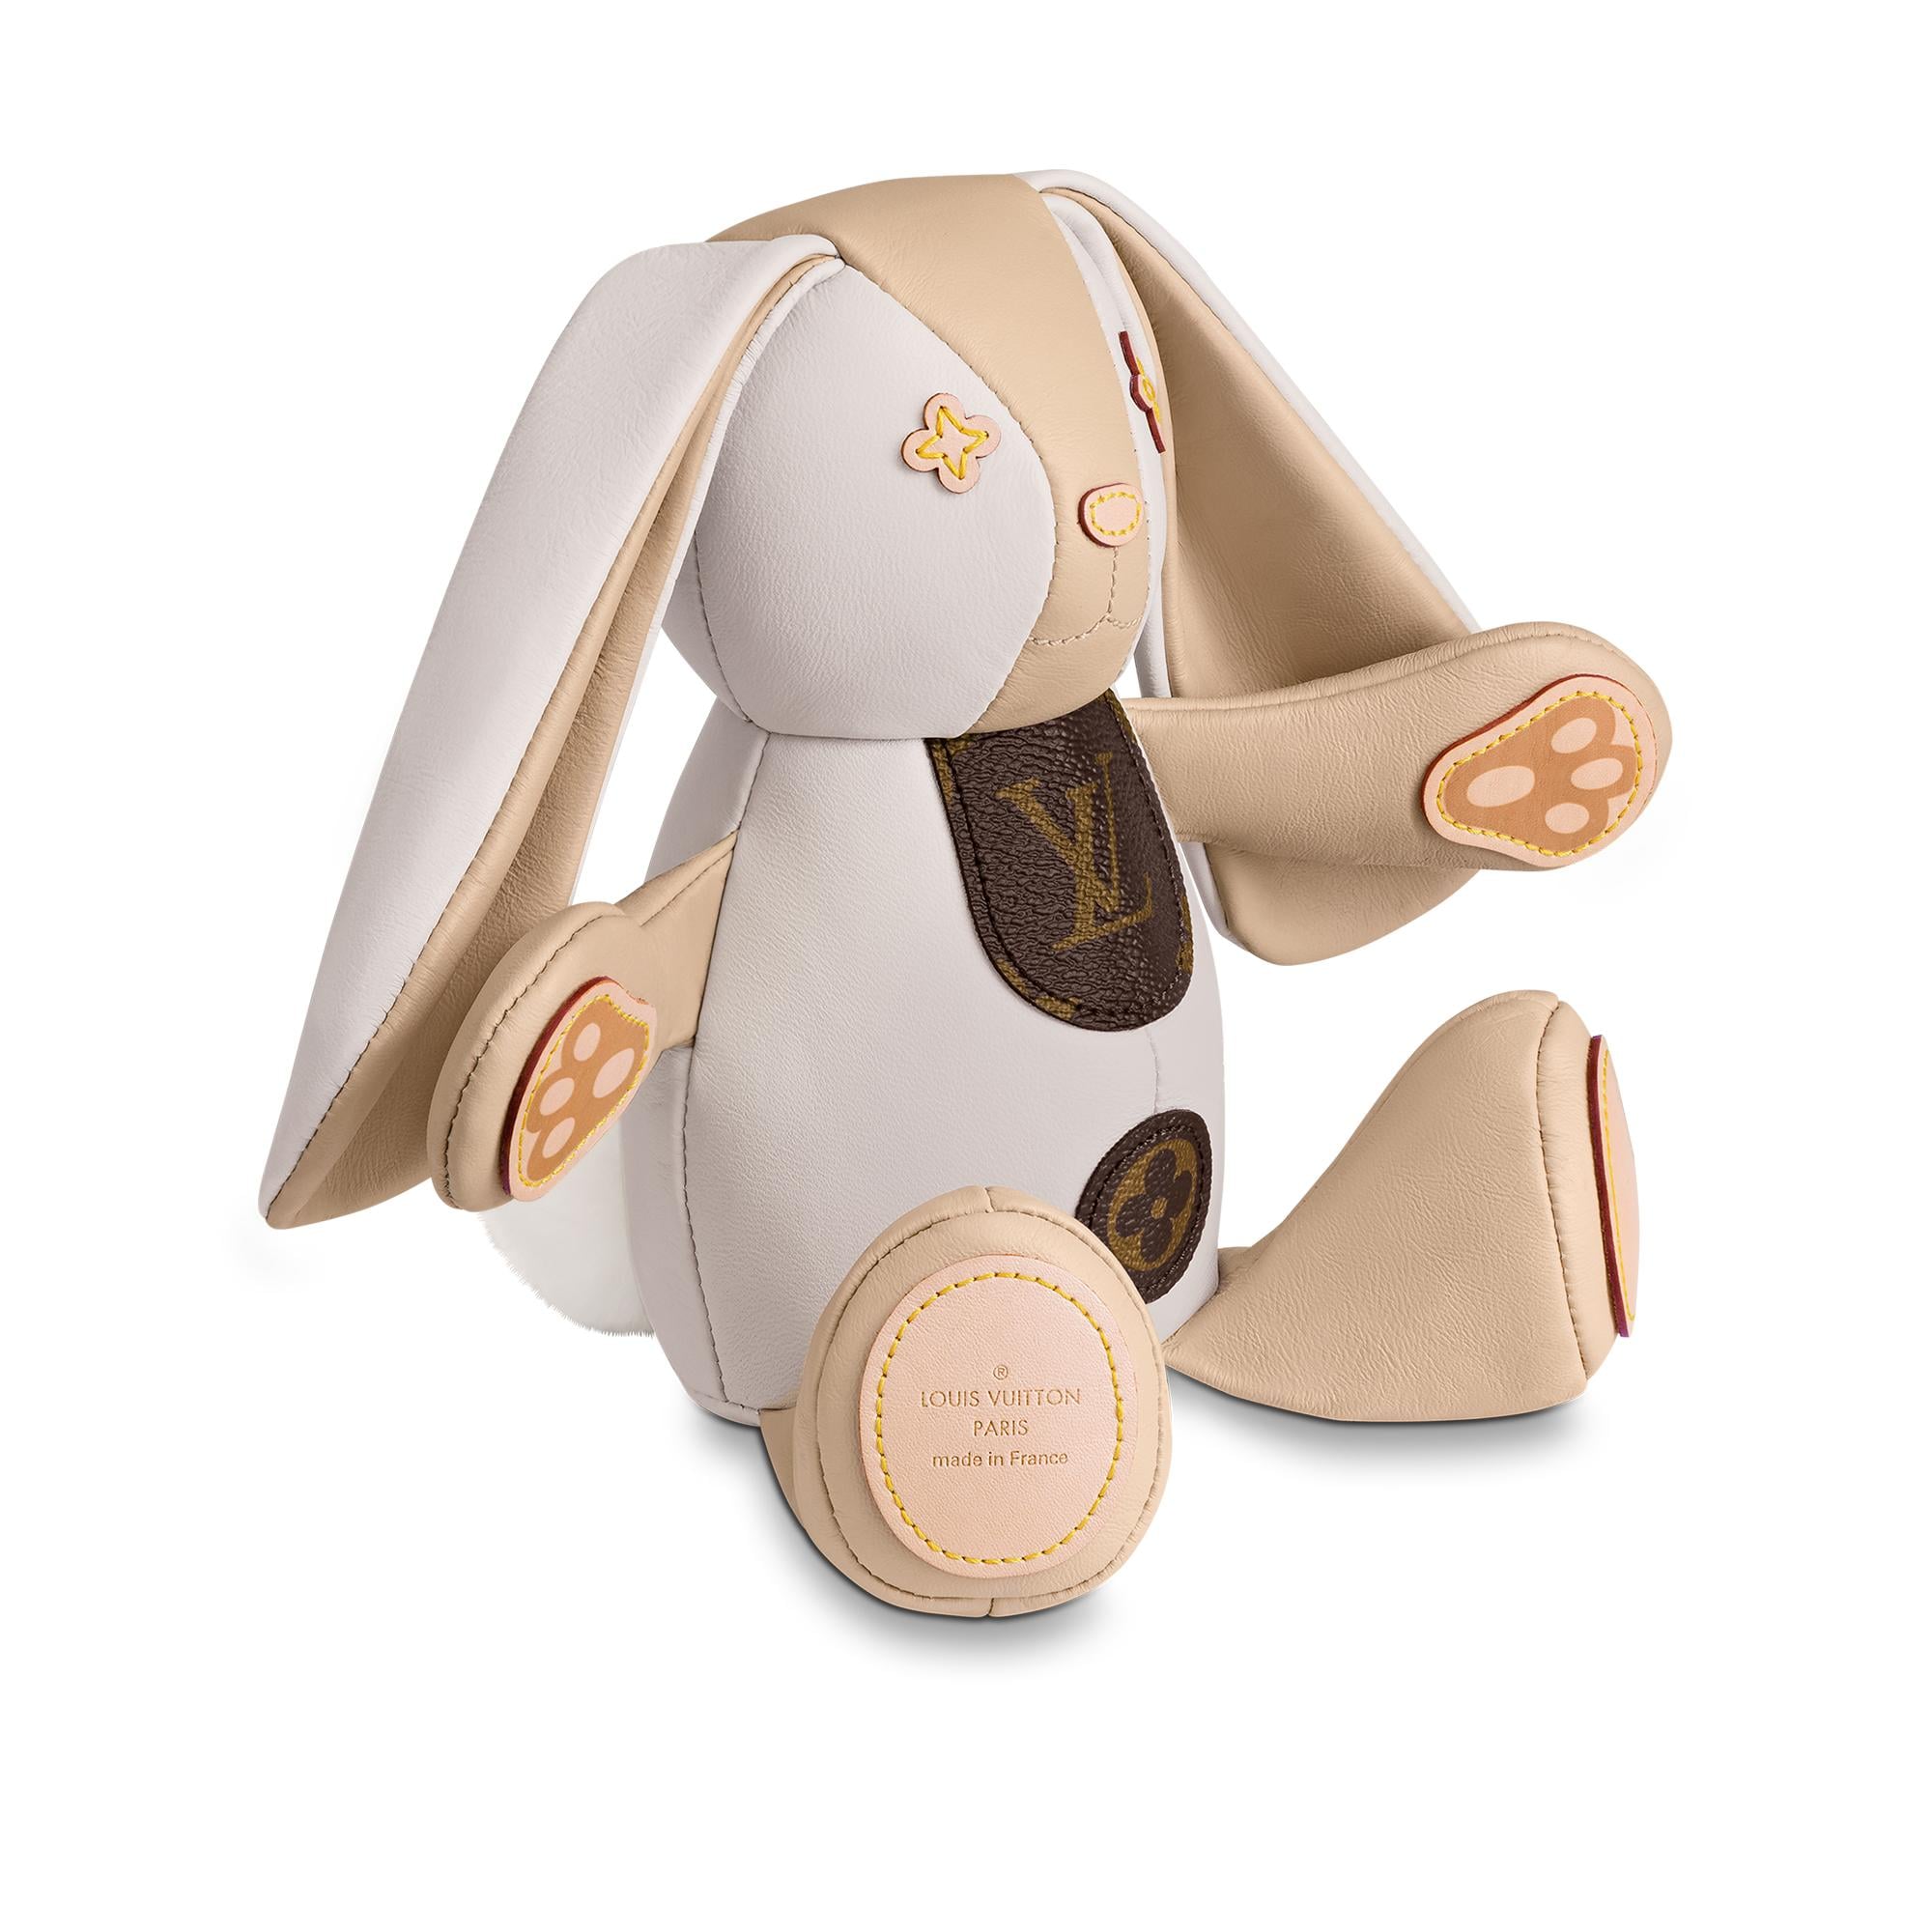 Louis Vuitton Bunny - For Sale on 1stDibs